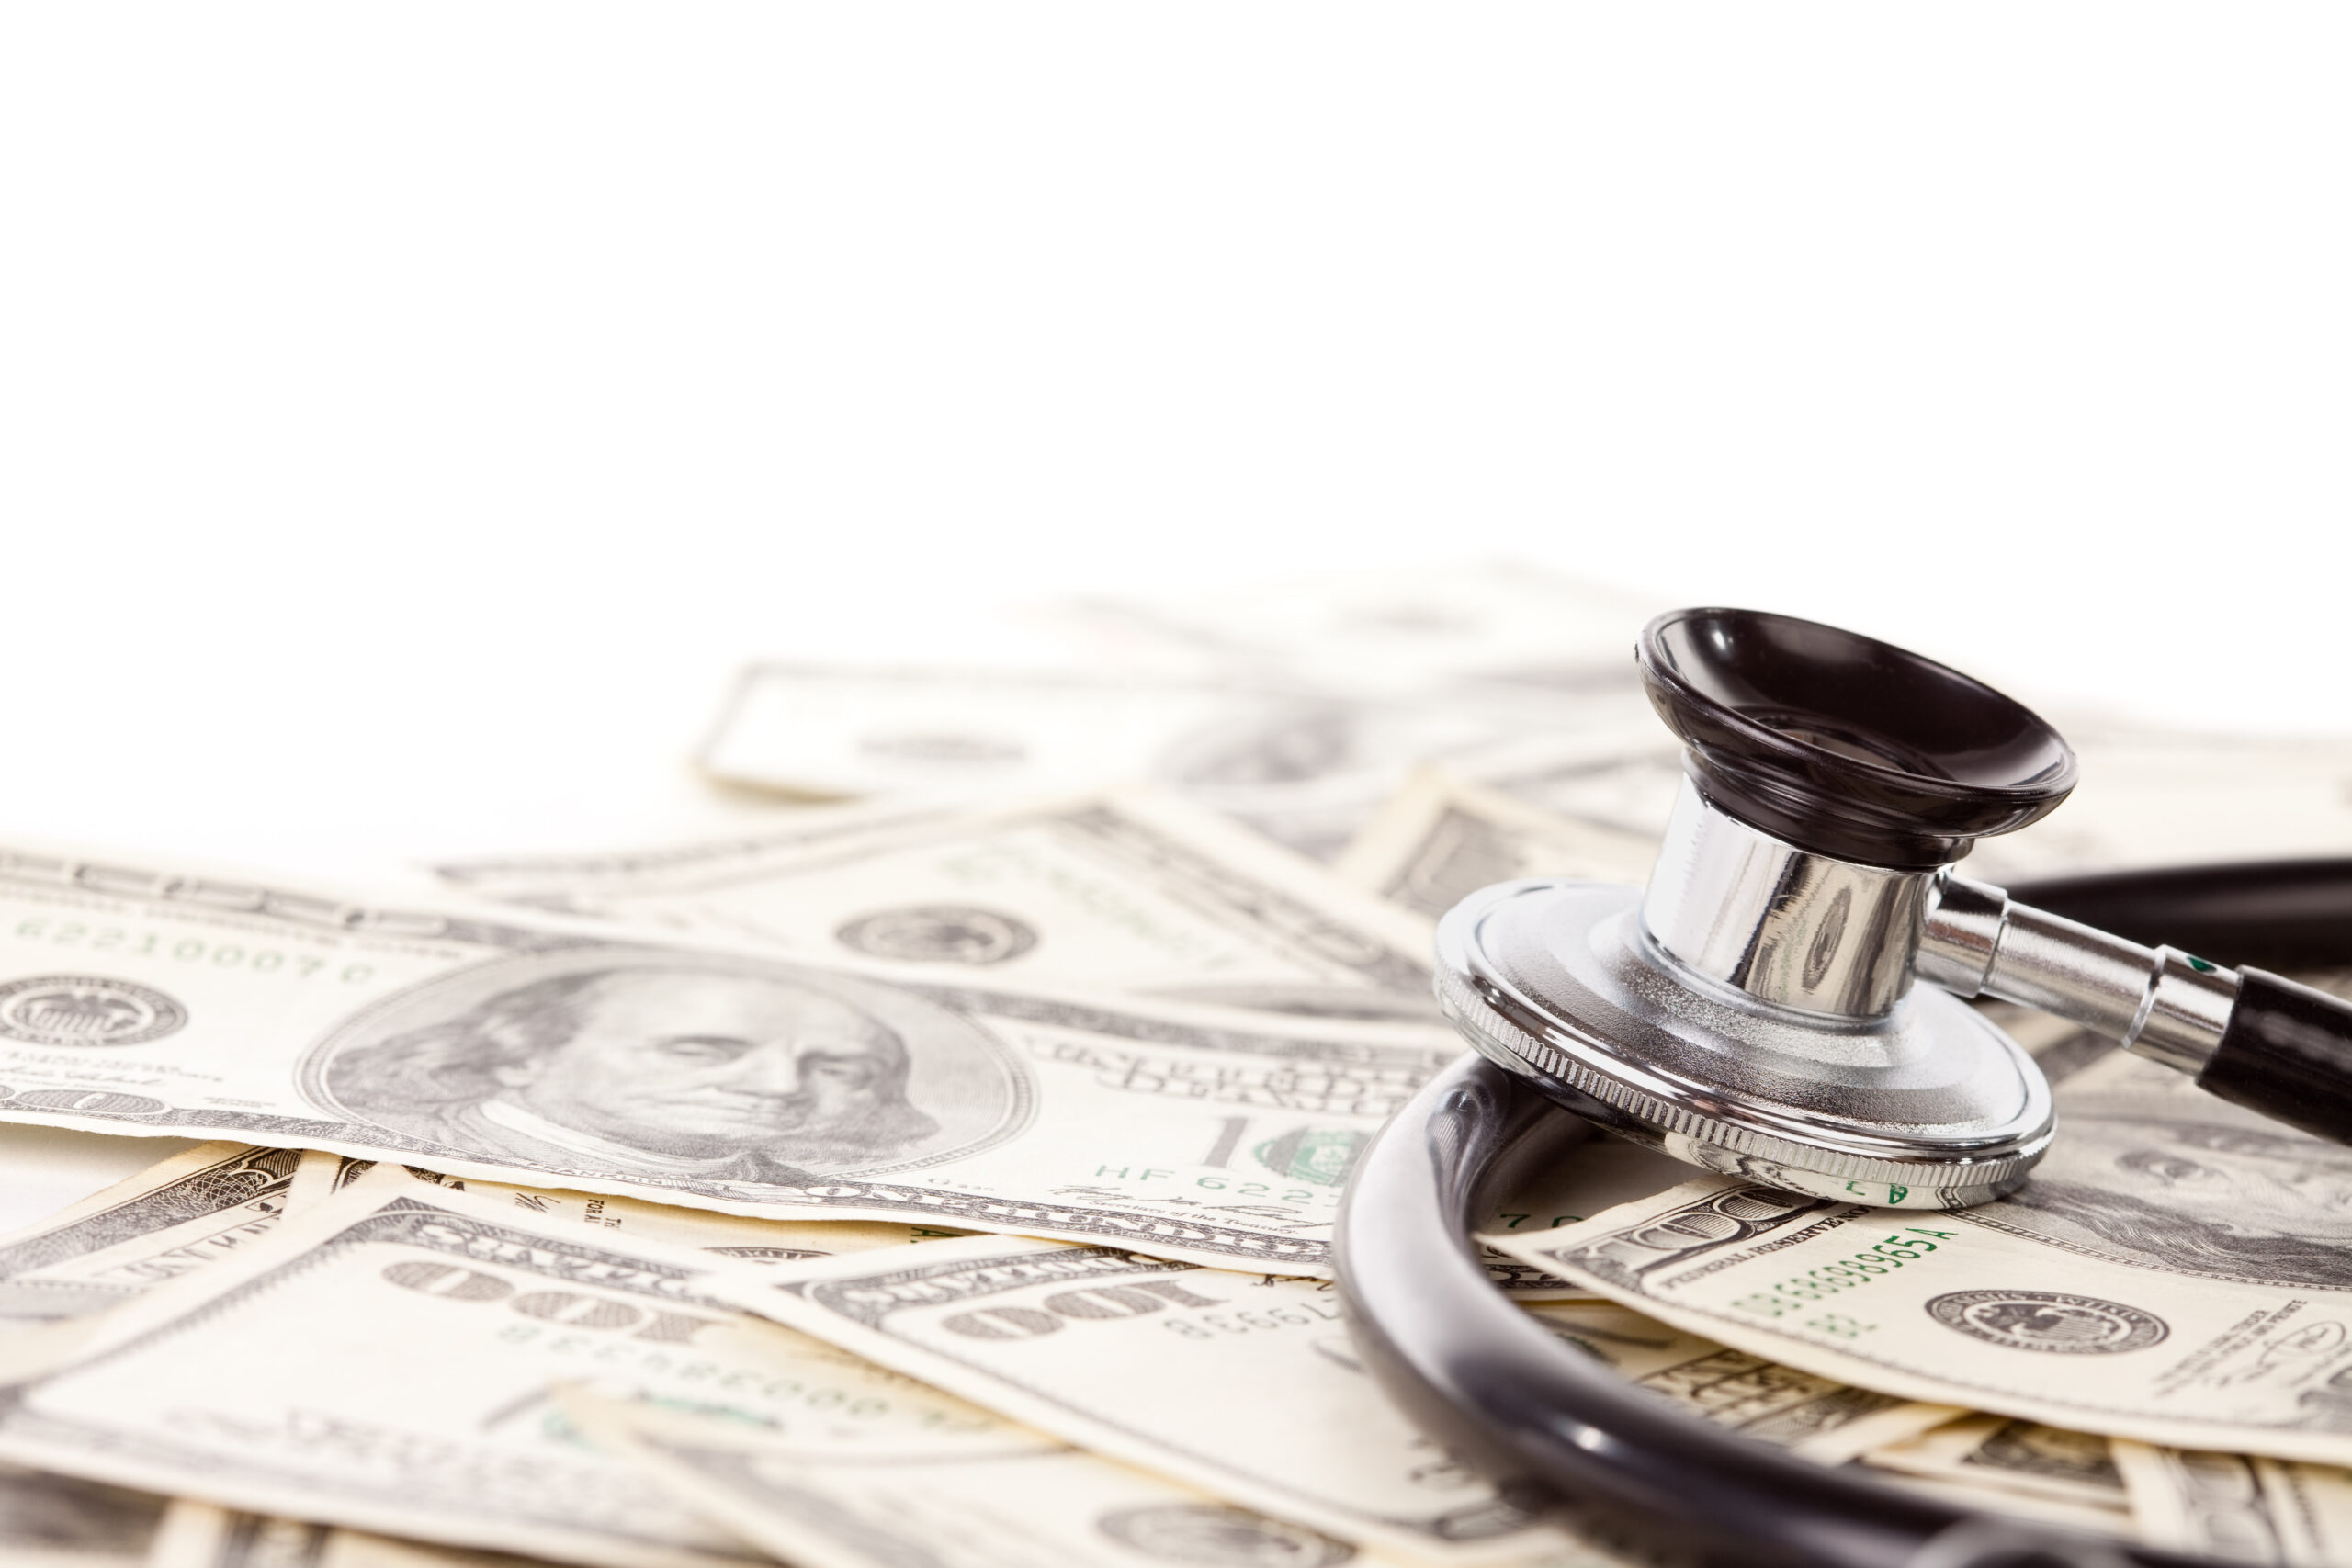 Stethoscope Laying on Stacks of Hundred Dollar Bills with Narrow Depth of Field.